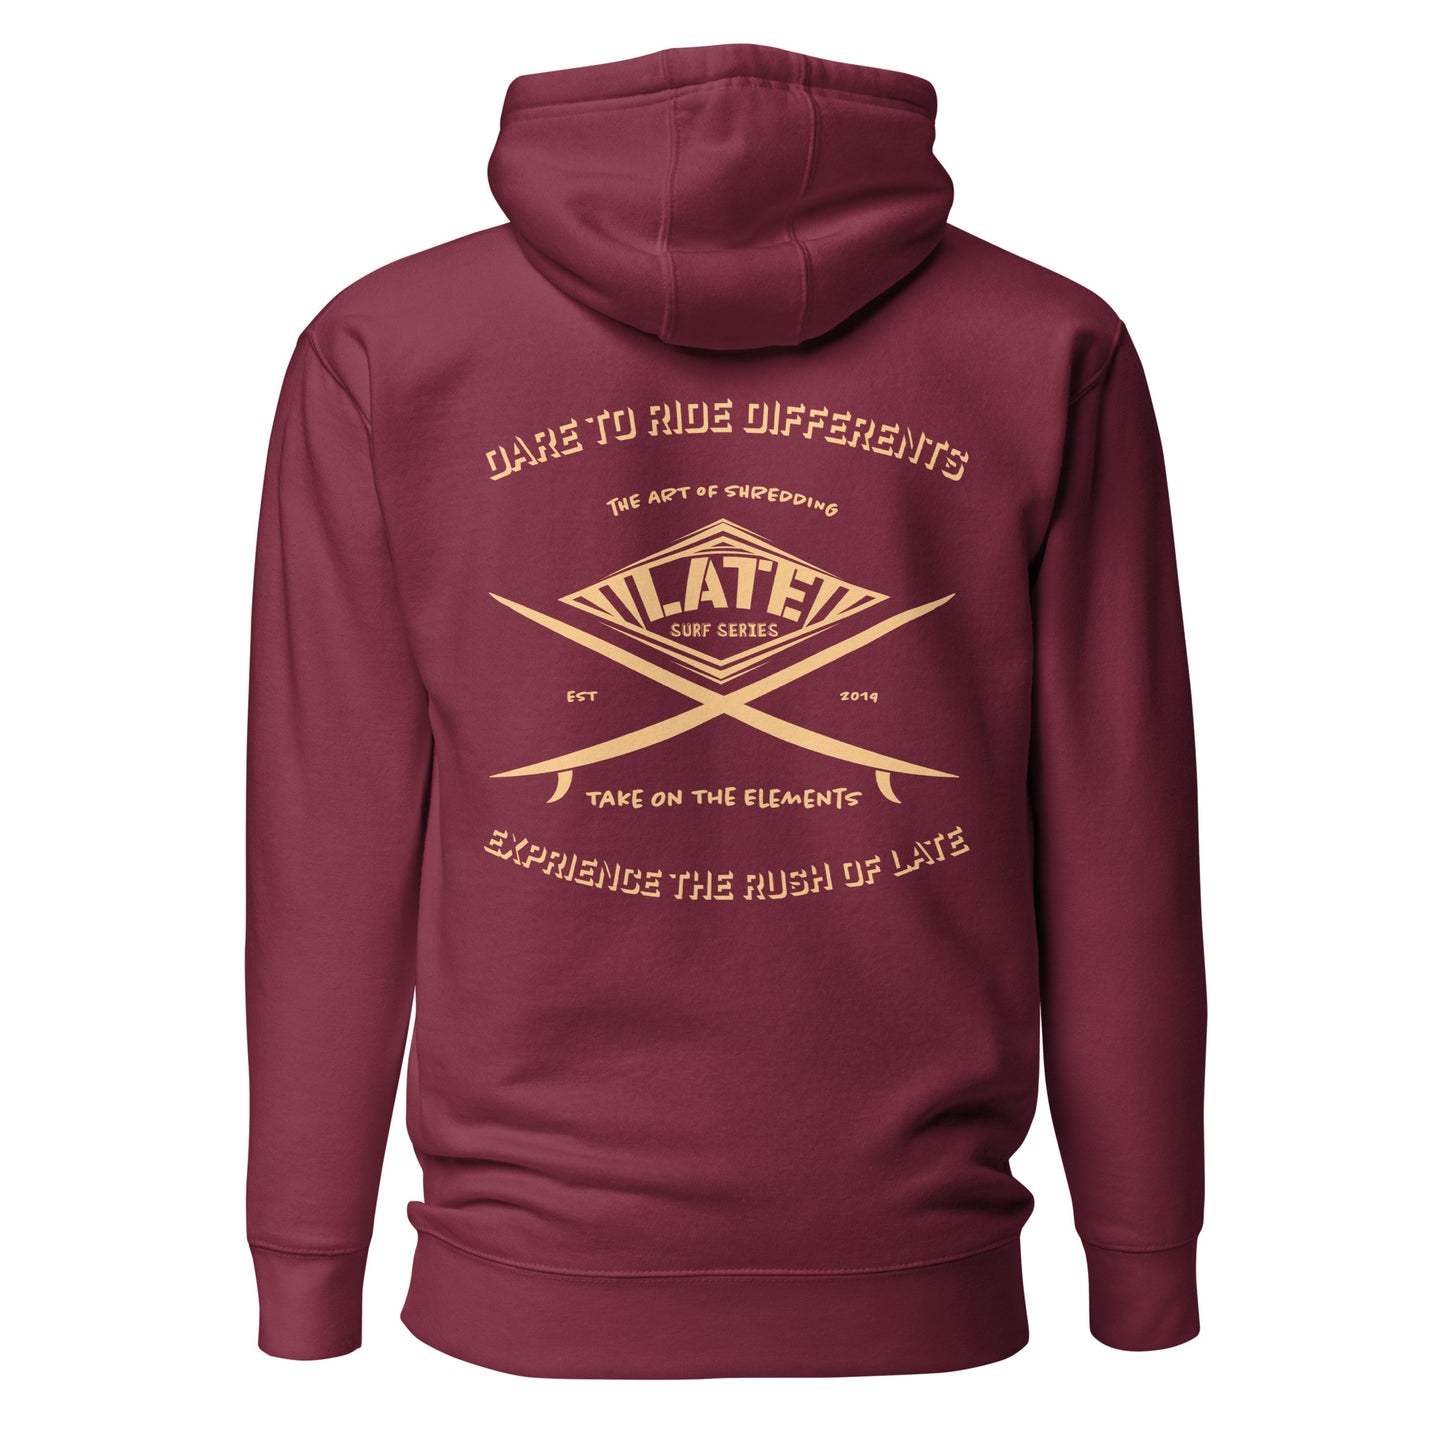 Hoodie surf bordeaux dare to ride differents / the art of shredding / take on the elements / Logo Late surf series